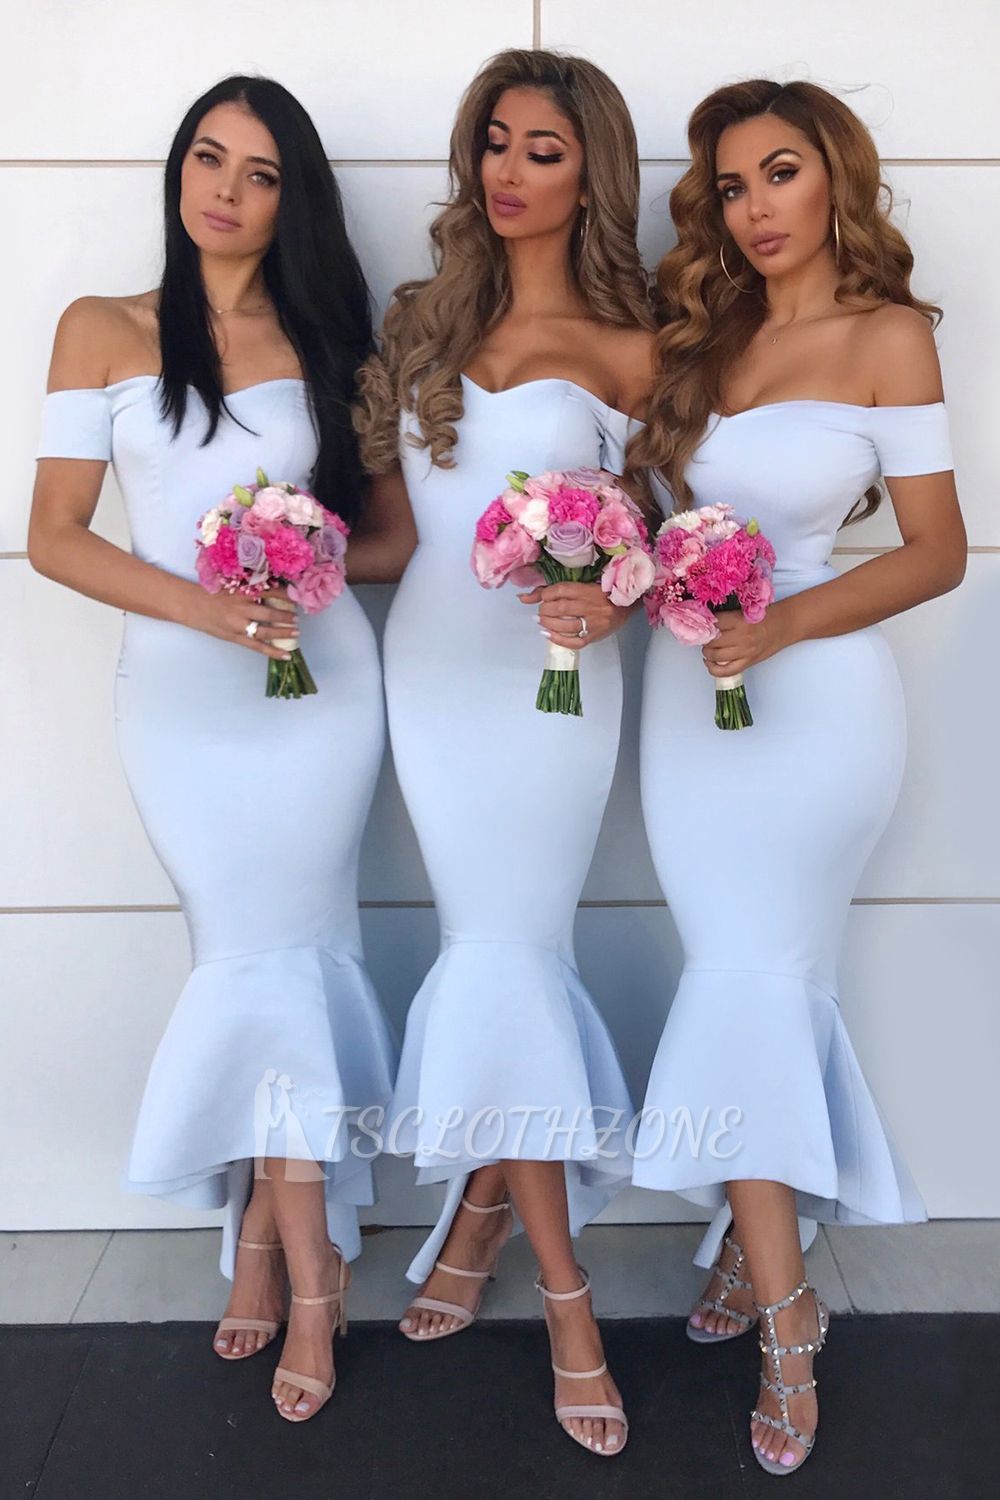 Sexy Open Back Sweetheart Neckline Meimaid Bridesmaid Dresses |Off-shoulder Ankle Length Wedding Party Gowns